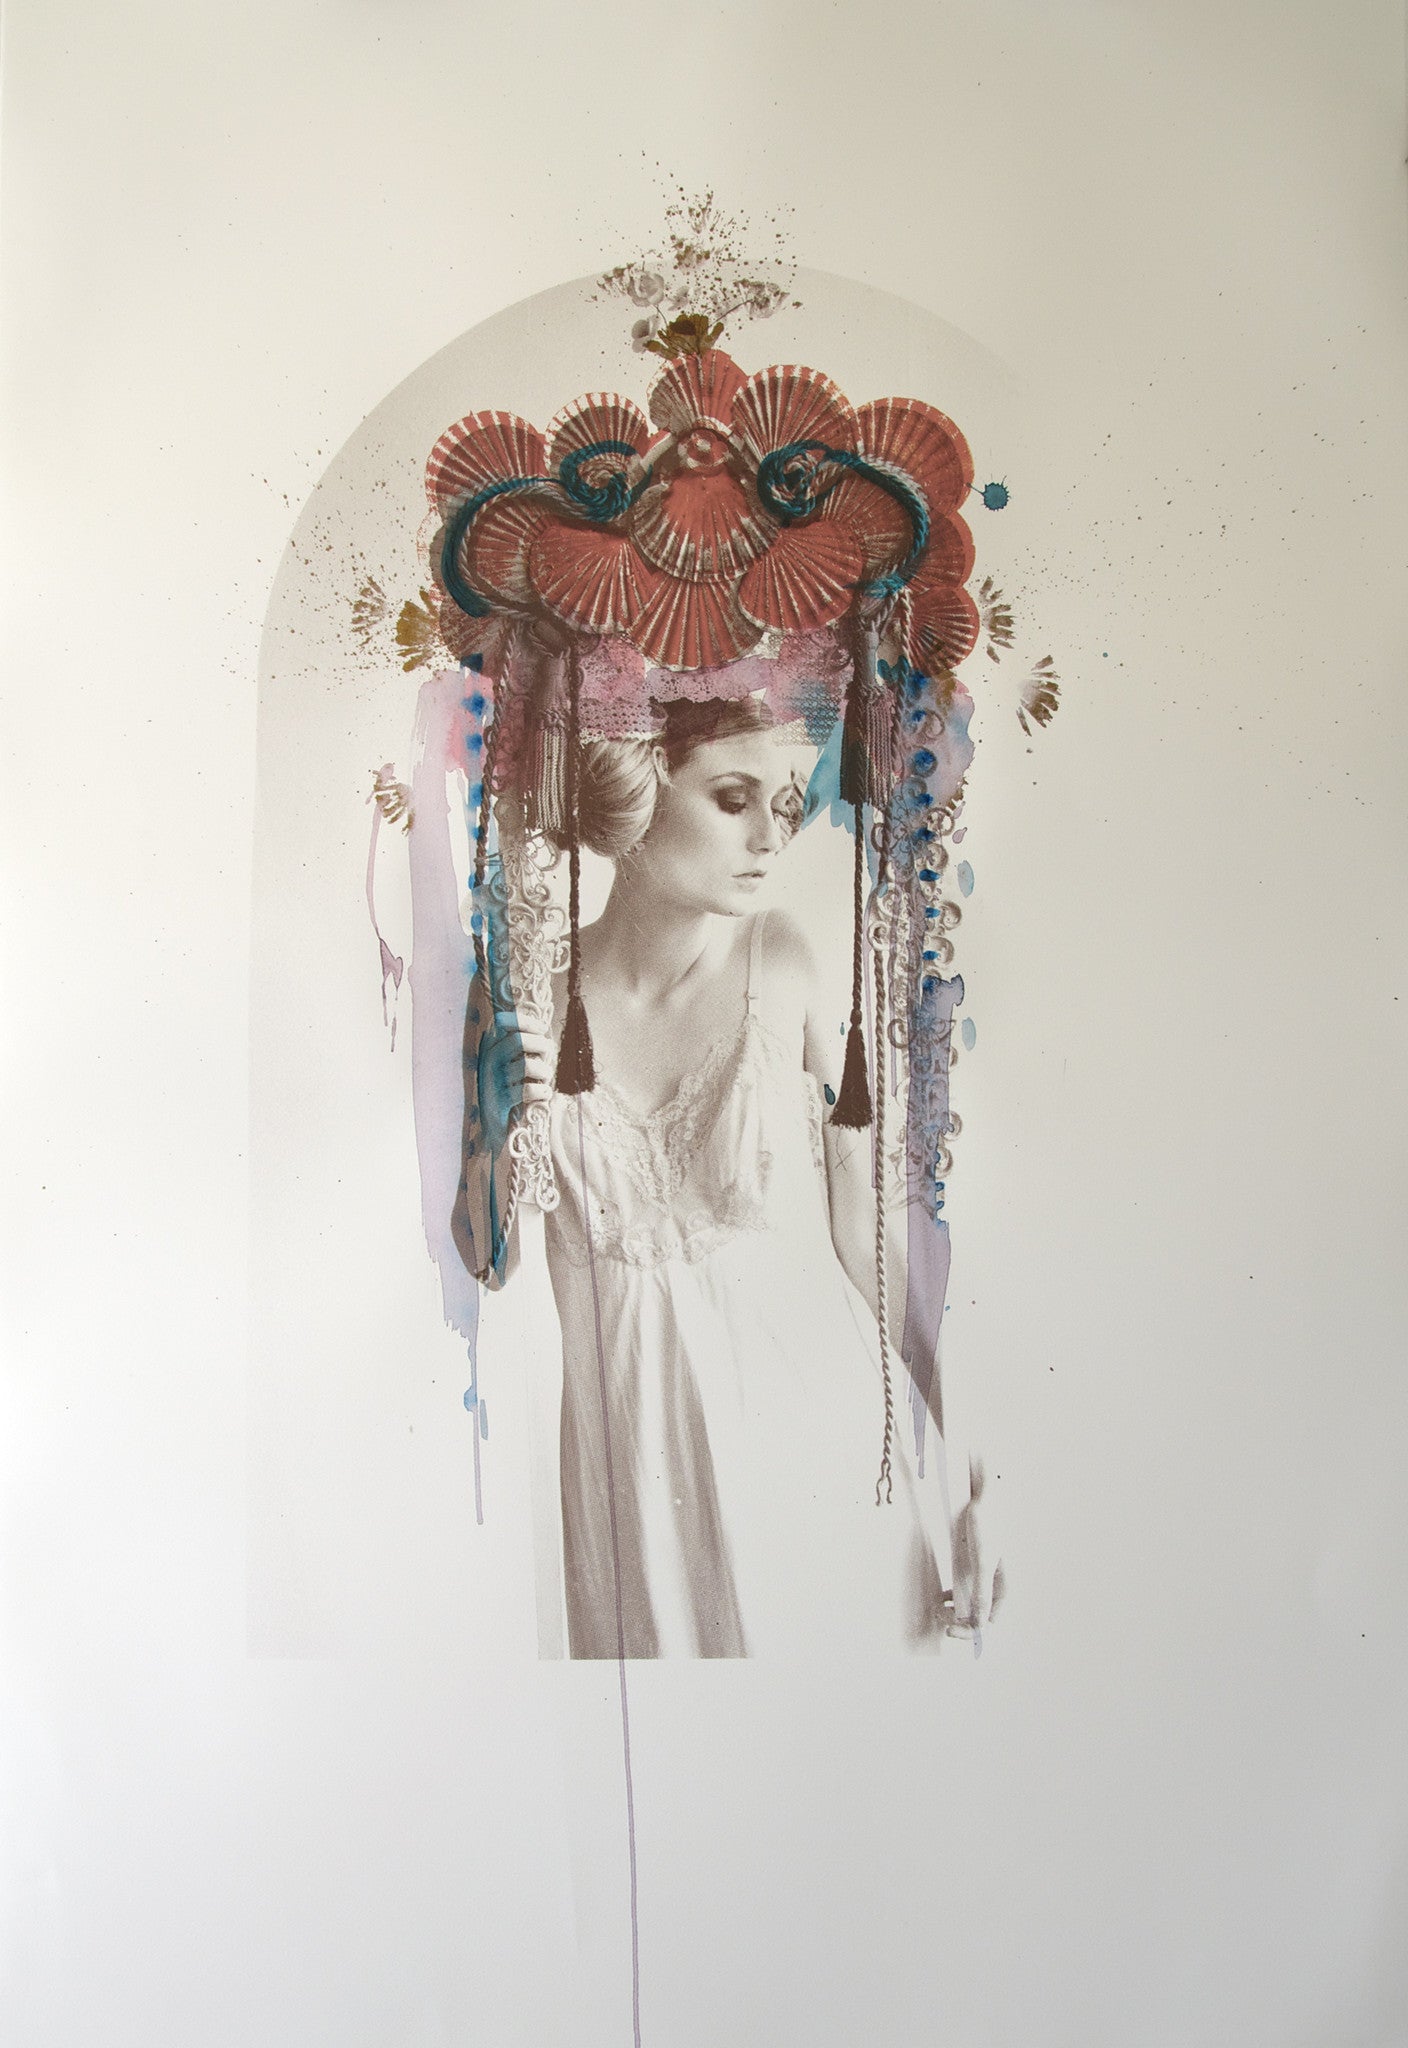 "Venus" - Rosie Emerson in collaboration with Becky Palmer